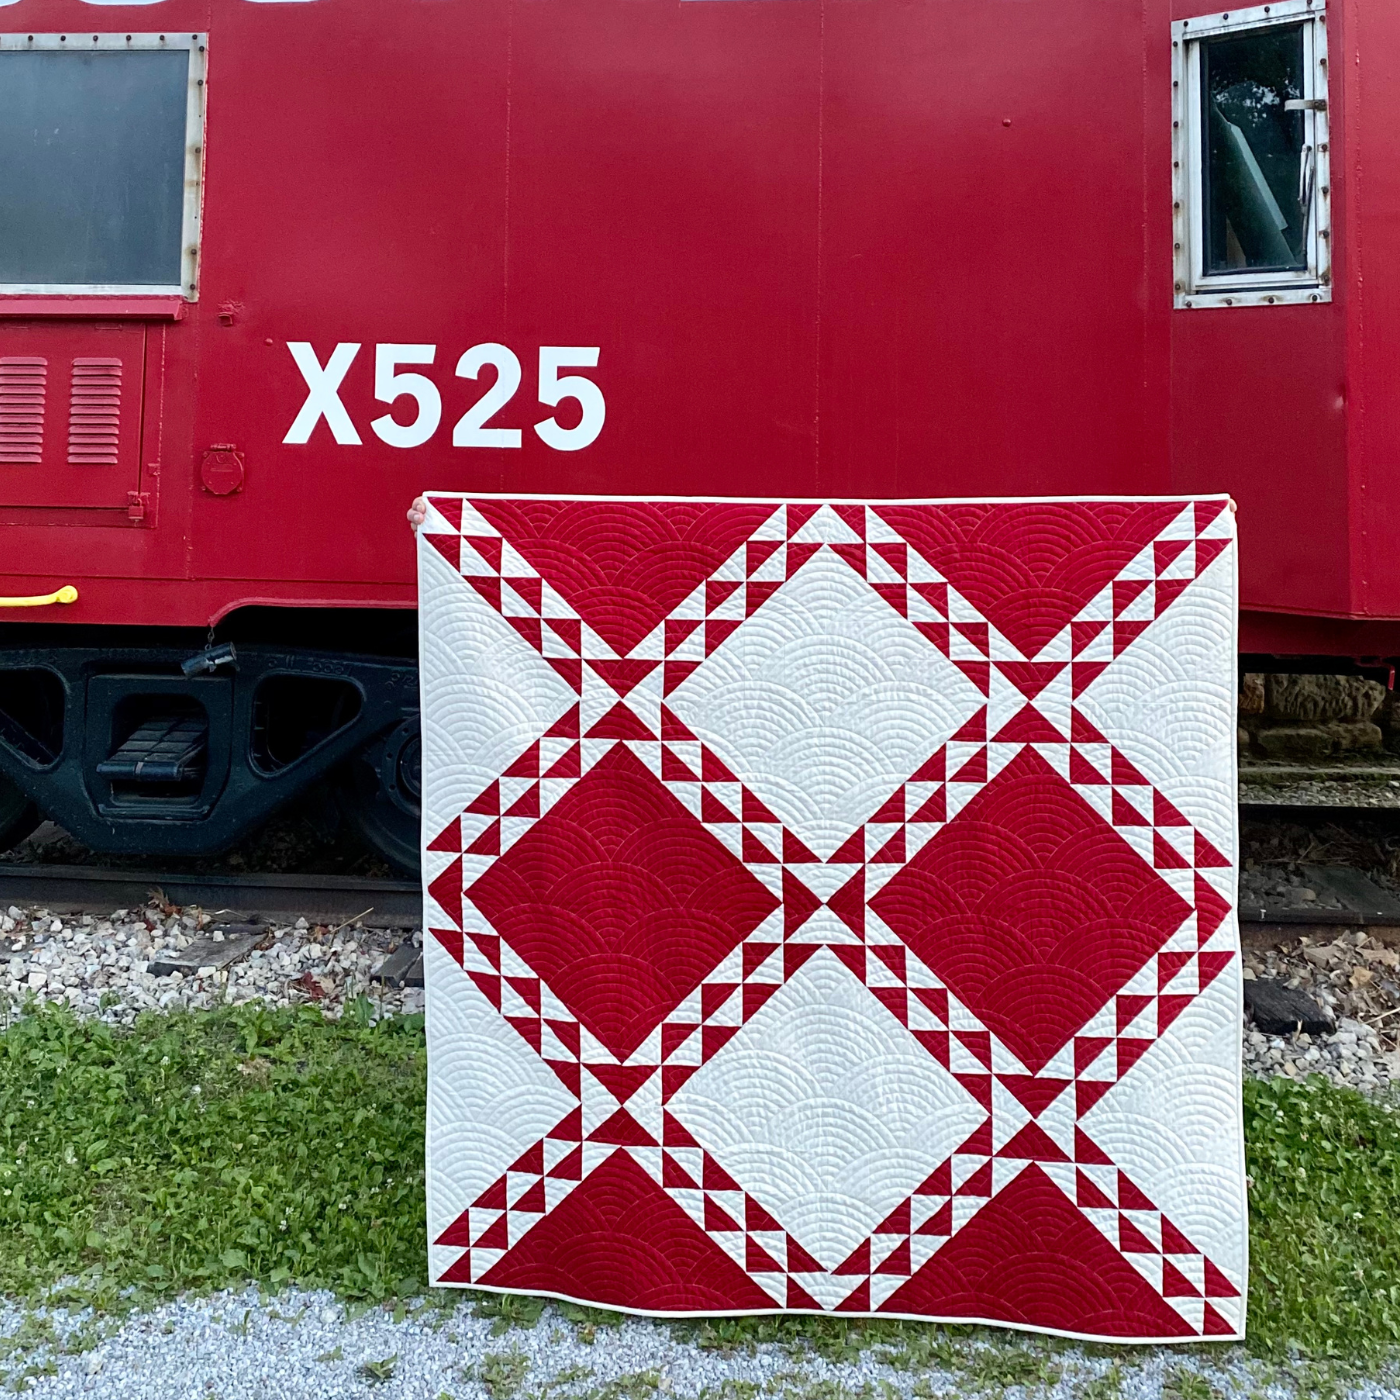 A red-and-white quilt featuring alternating rows of large red and white diamonds outlined by two small rows of smaller red and white alternating diamonds is in front of the side of red train car that has two small square windows, one on the left, one of the right that says X525. The quilt is standing up right in front of the train car on a patch of gravel and grass.